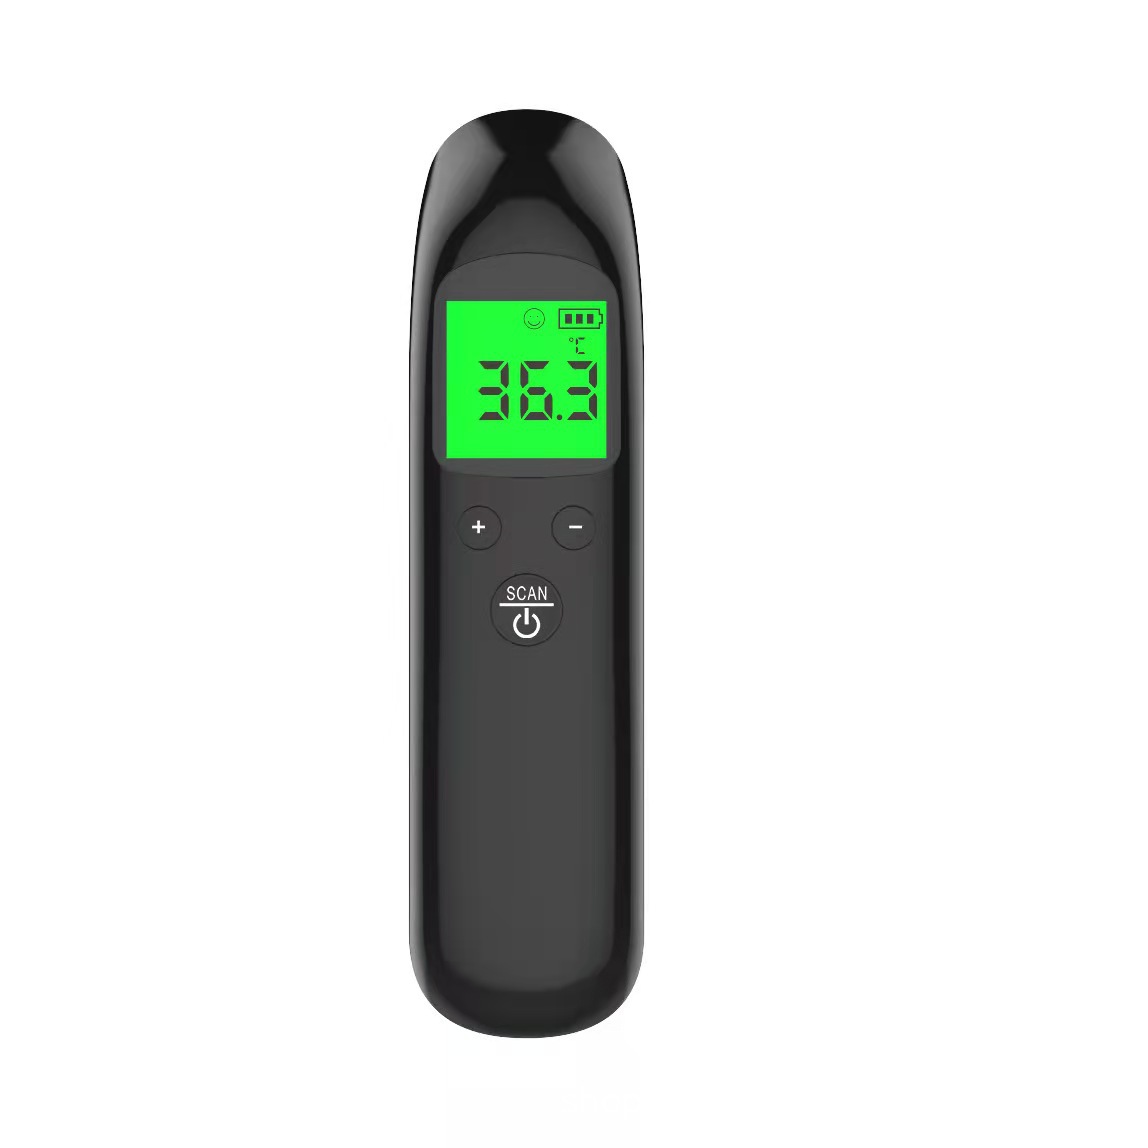 What are the benefits of a light based forehead thermometer - News - 1